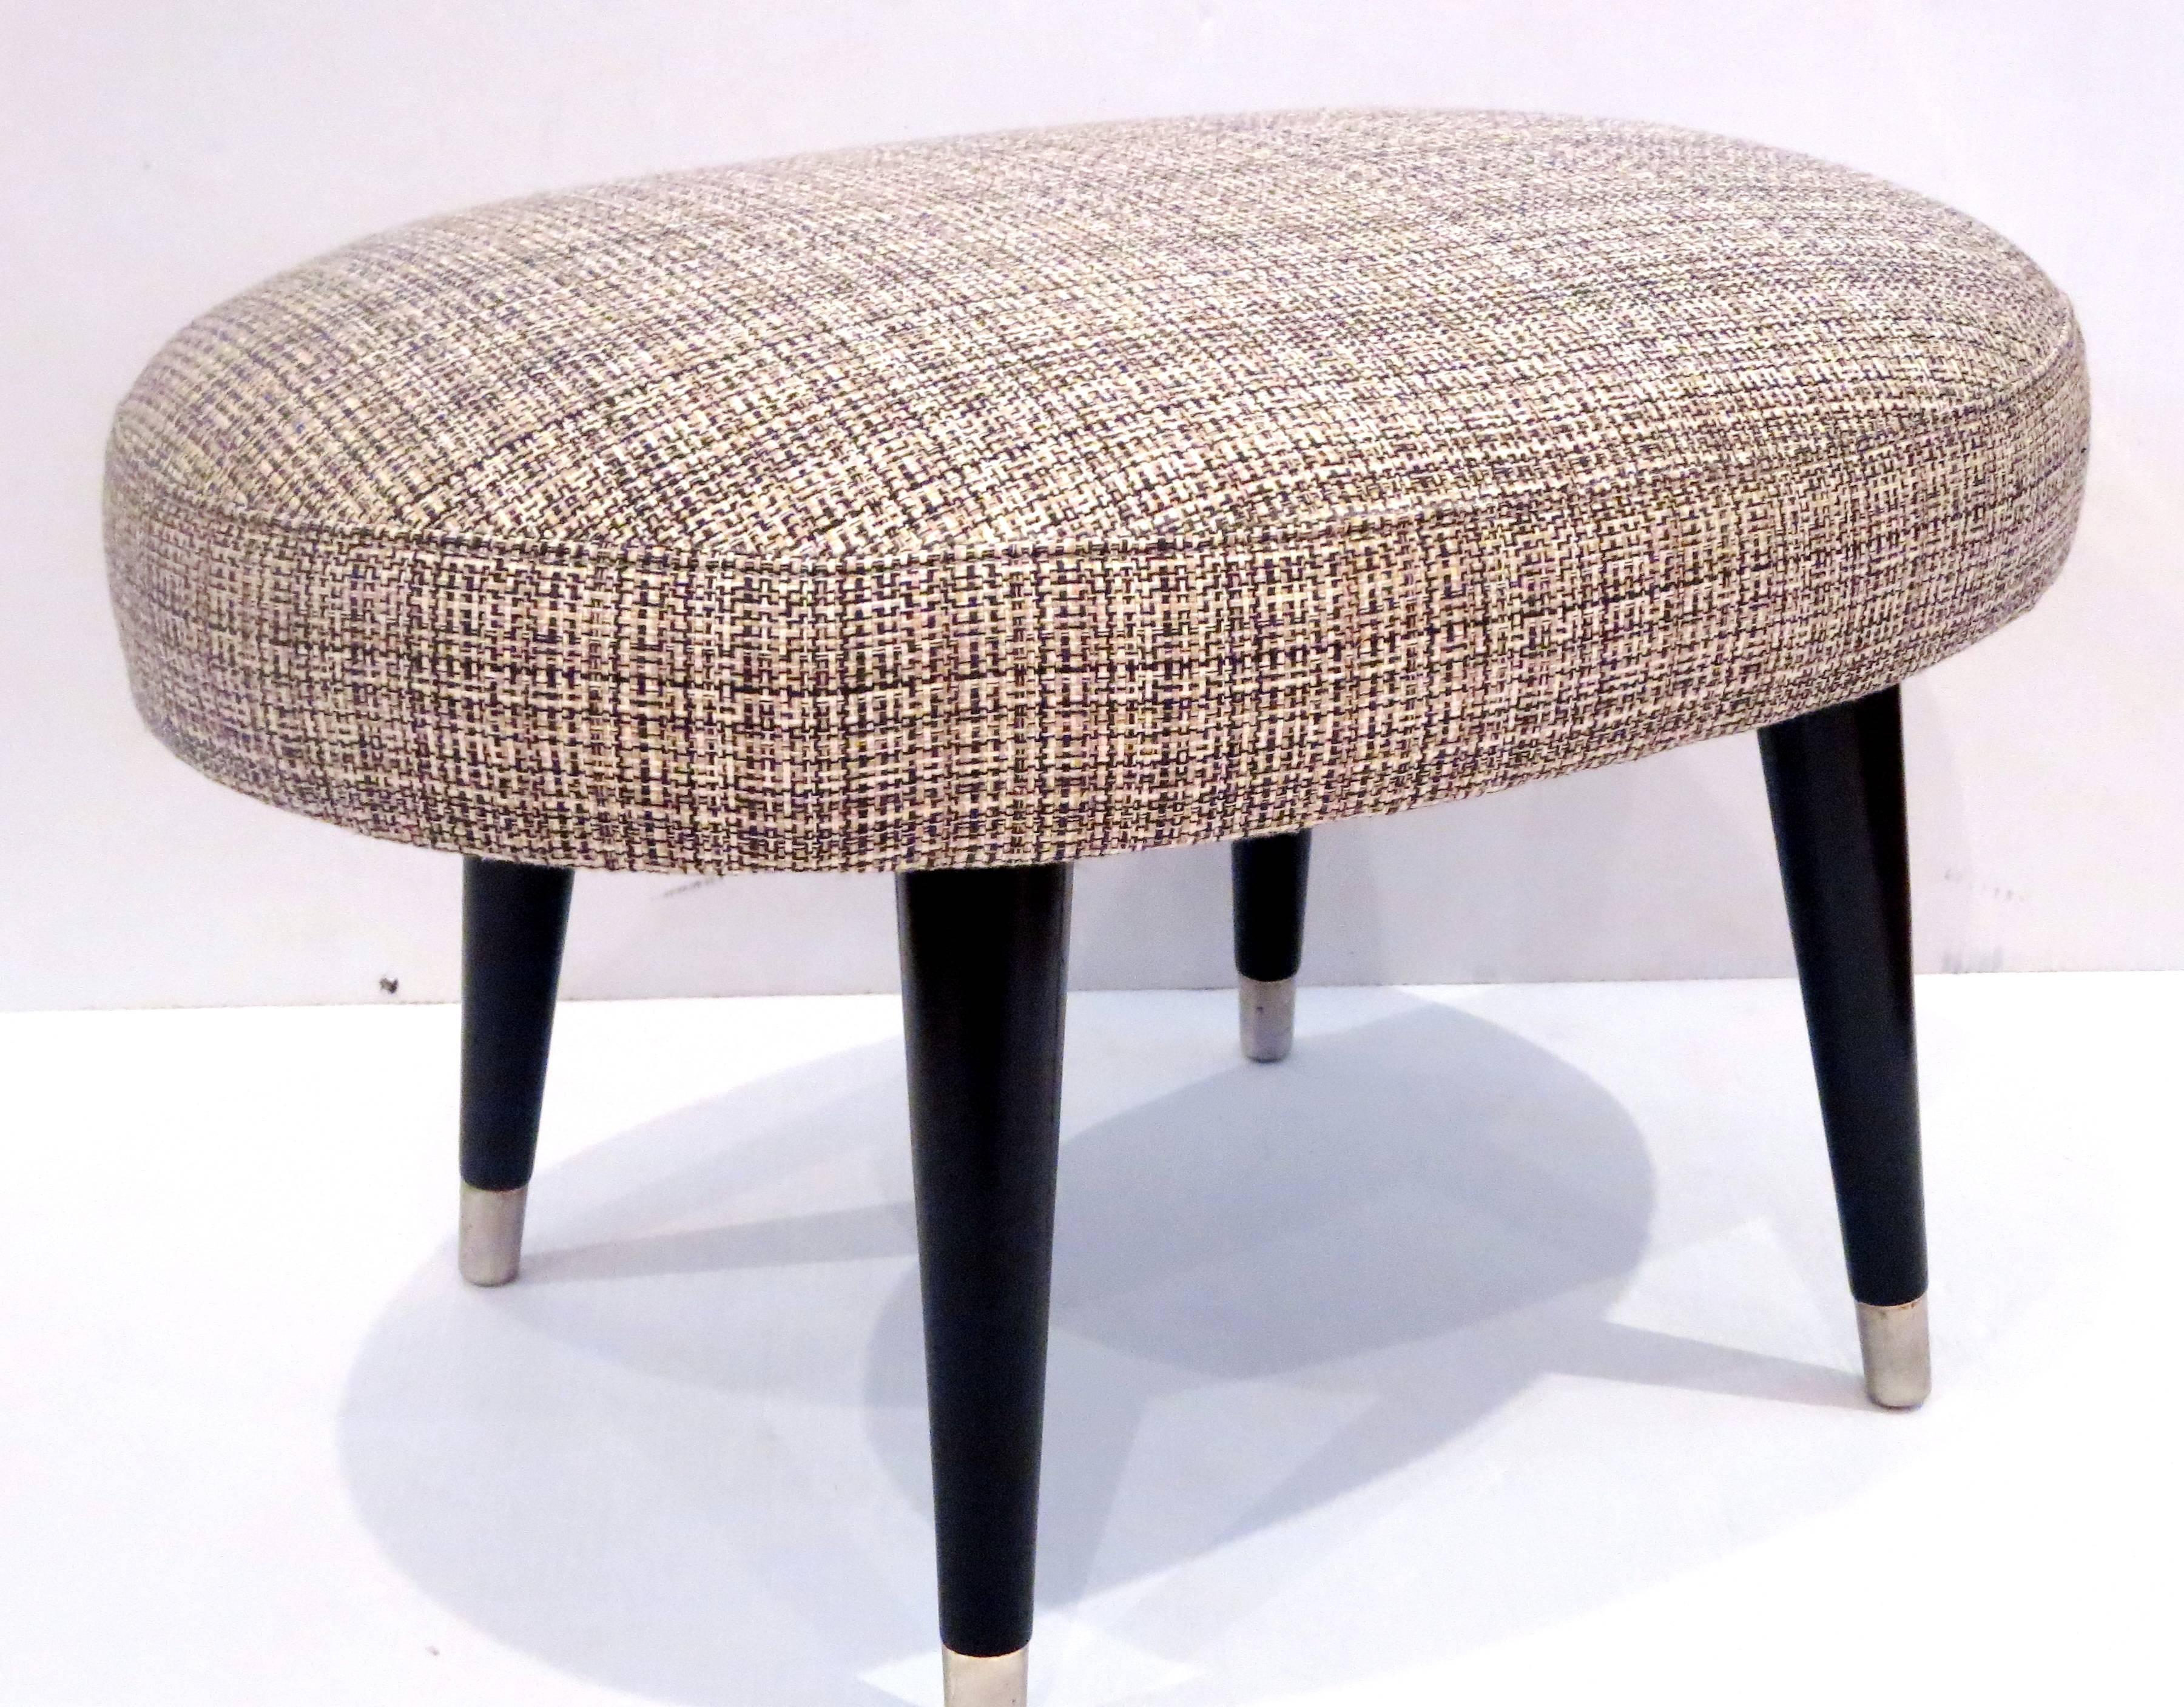 Excellent Mid-Century footstool has an elongated oval cushion and black lacquered legs. Upholstered in black and white tweed. Fully refinished and in excellent condition.